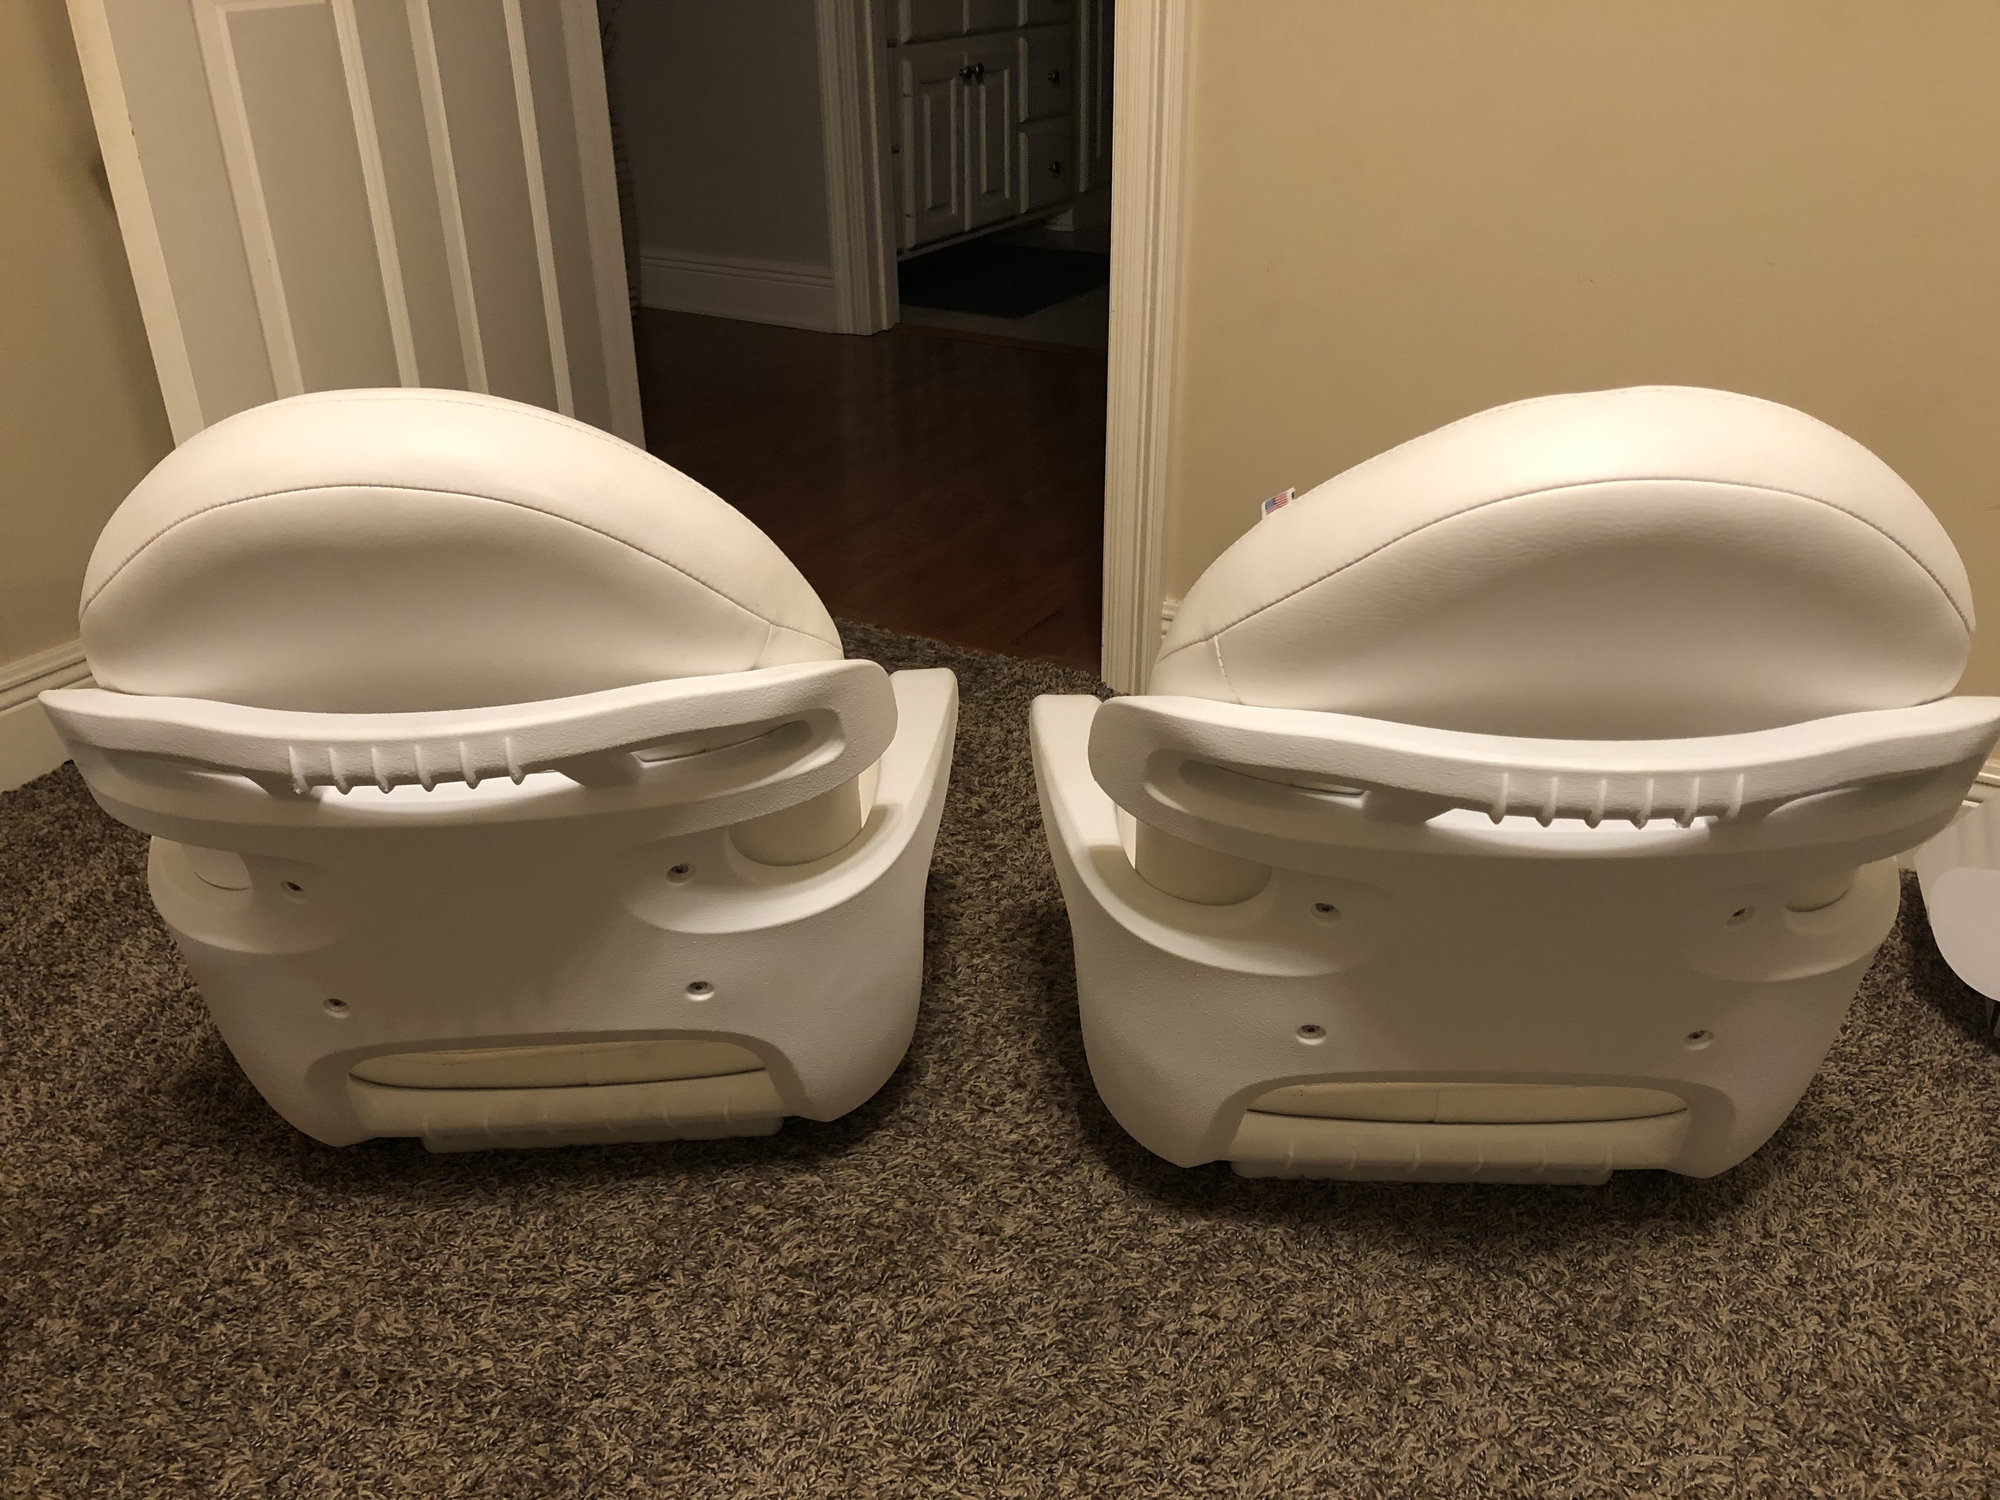 Tempress Elite High Back Helm Seats - The Hull Truth - Boating and